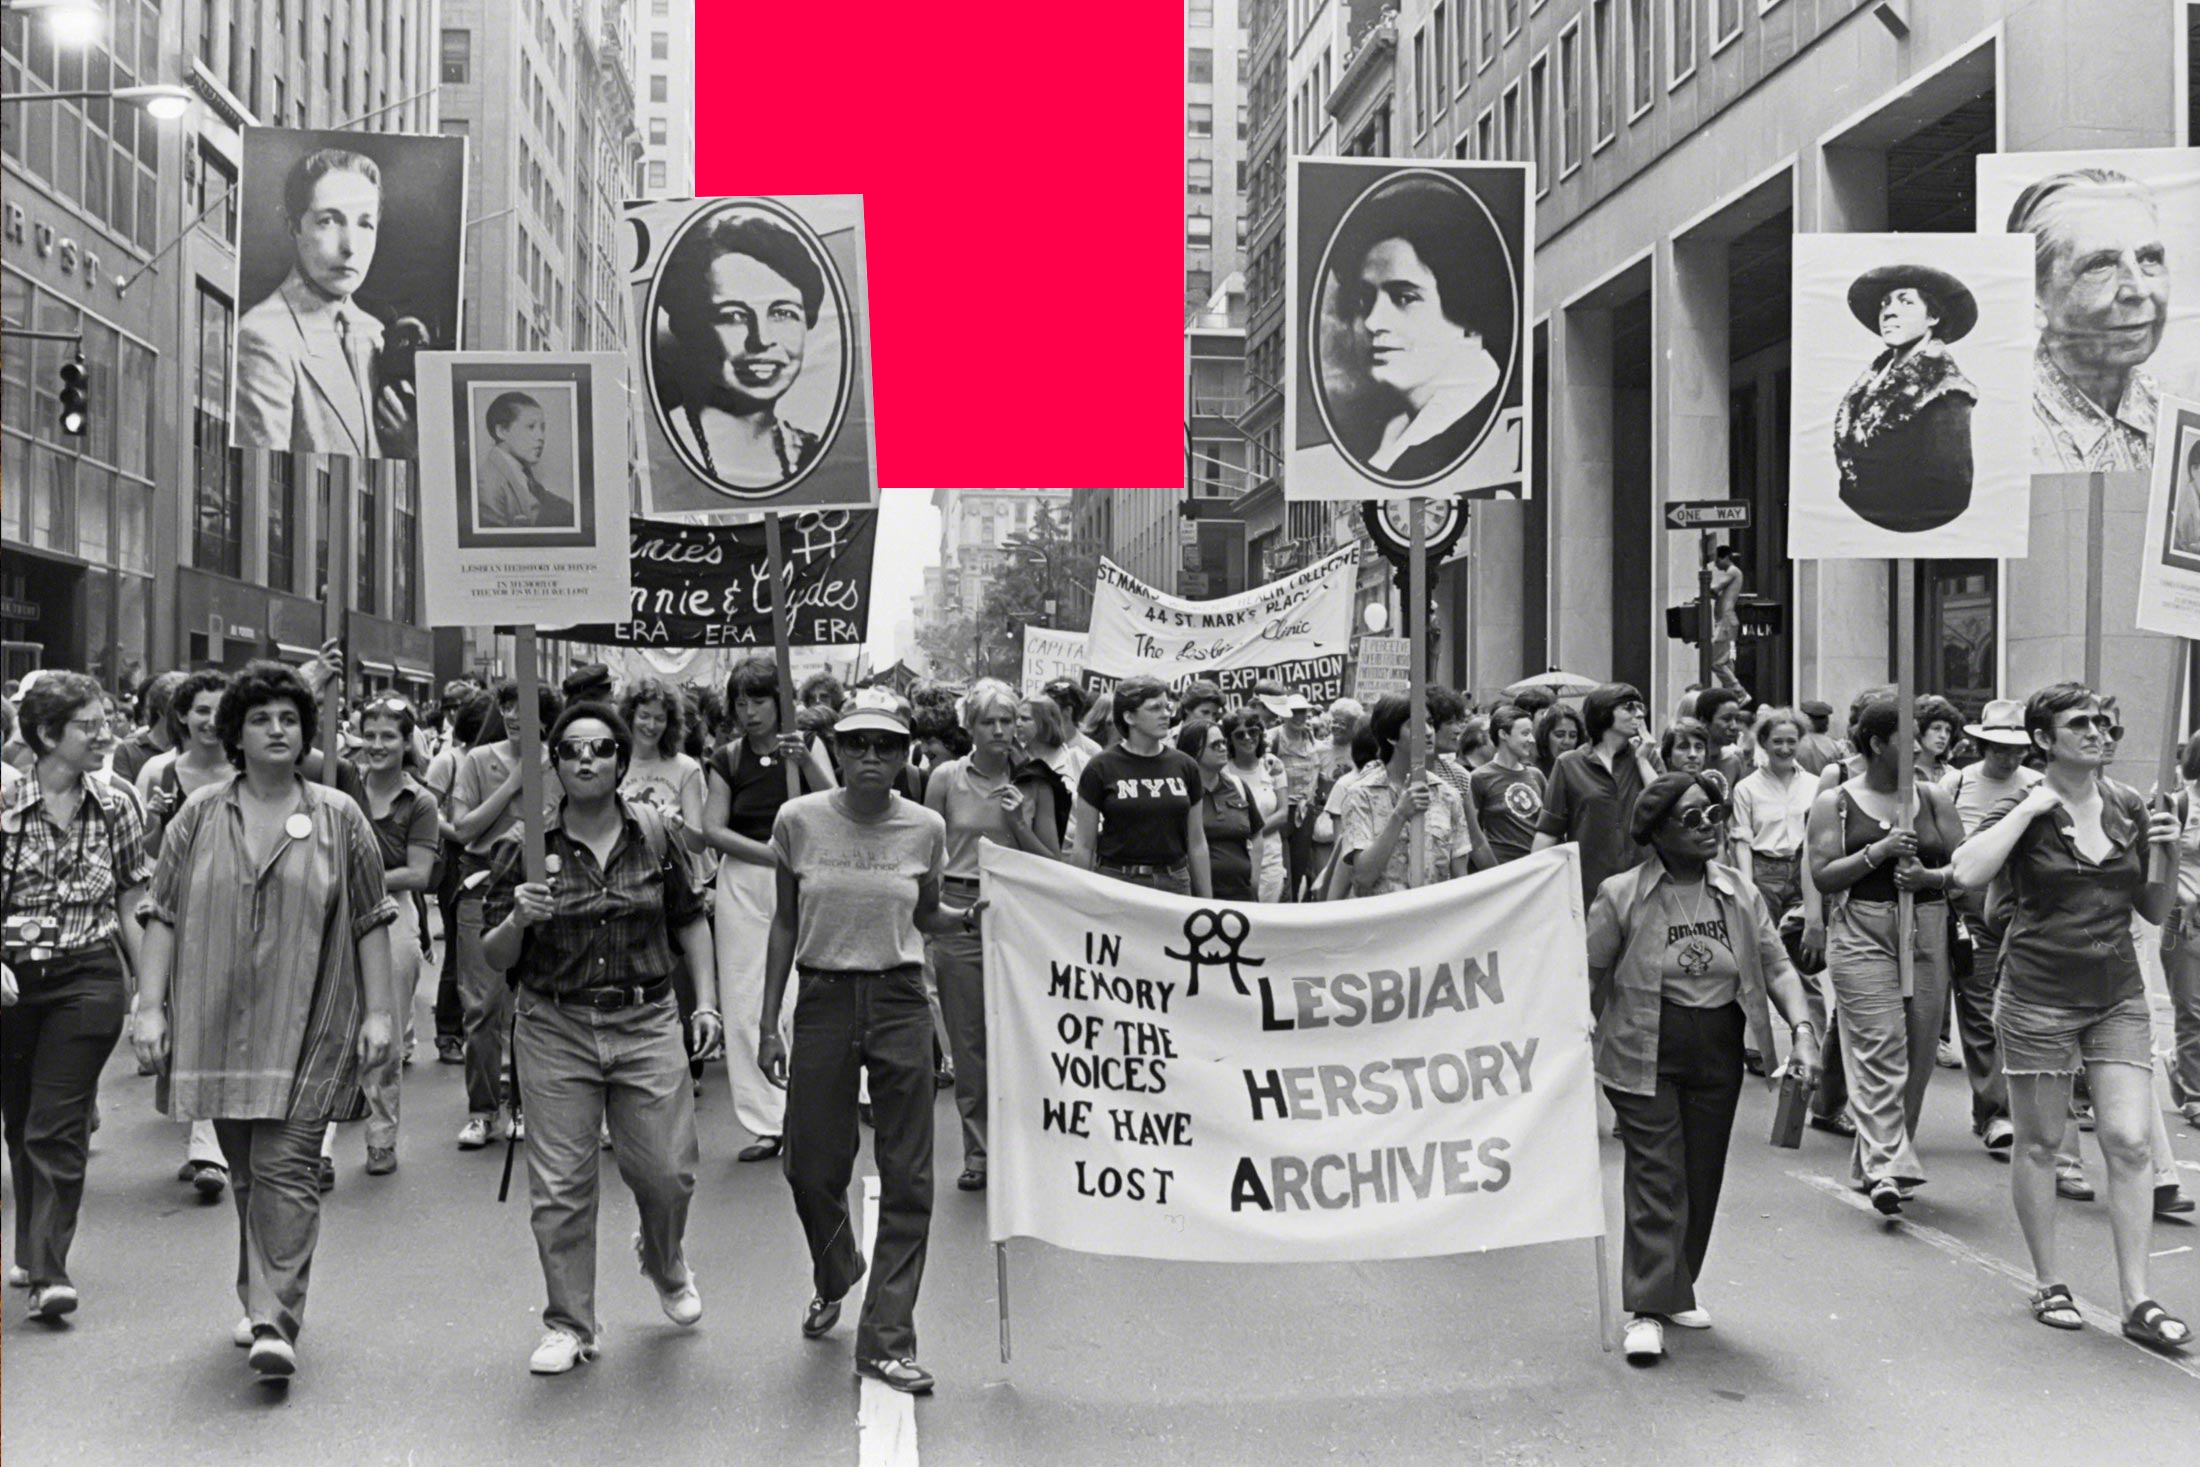 People marching in the Pride Parade circa 1980 in New York City. In the center, two people hold a banner for Lesbian Herstory Archives; others hold up posters of LGBTQ icons.